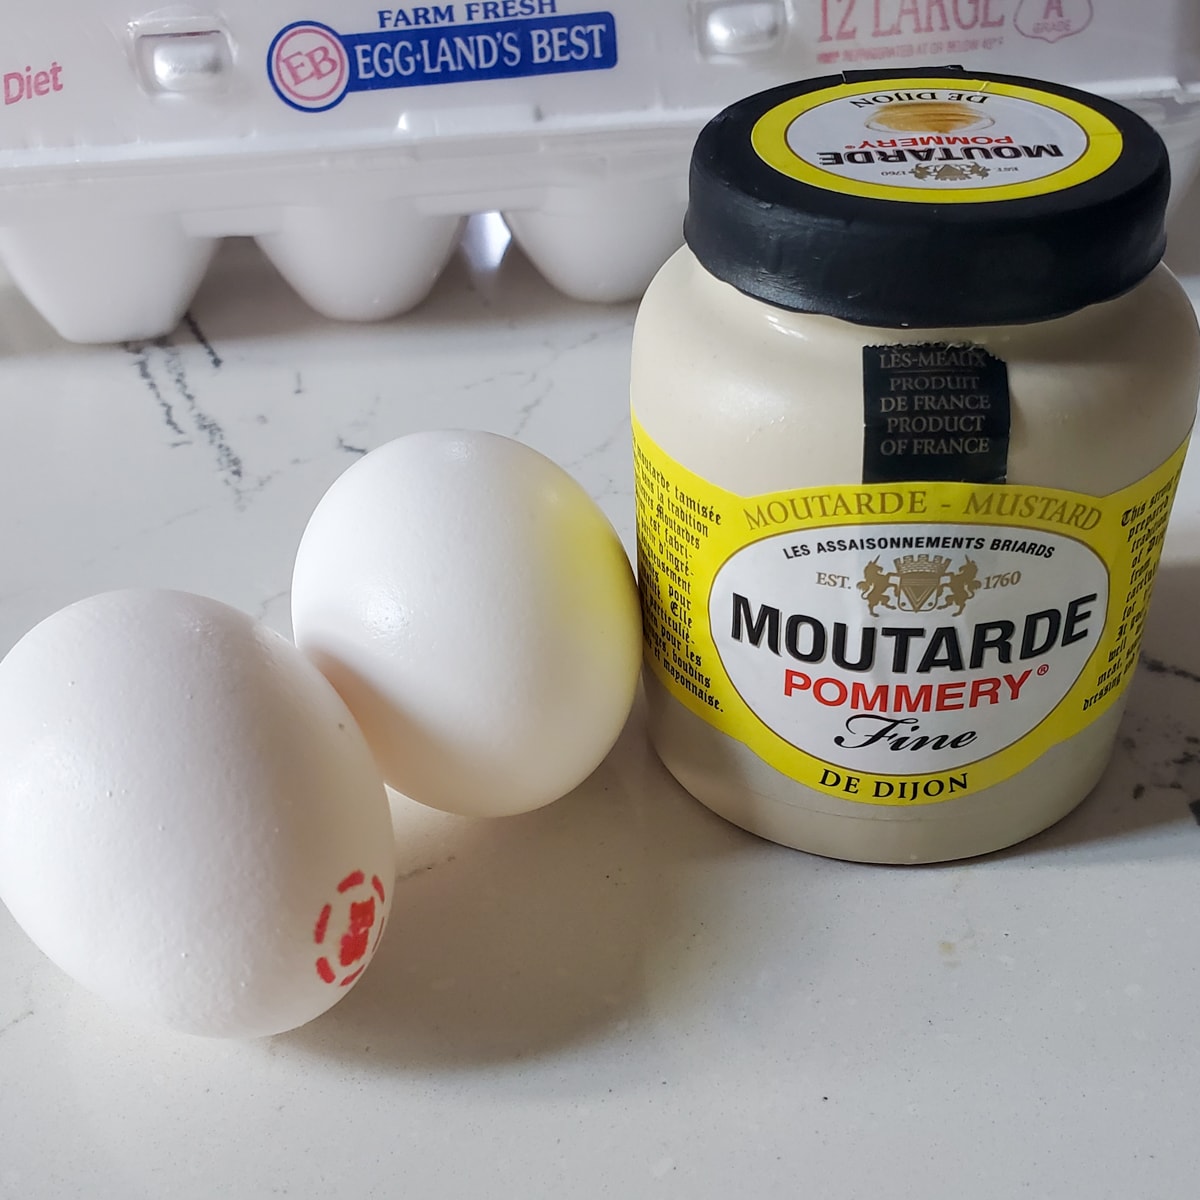 Two eggs and Dijon mustard on a granite countertop.